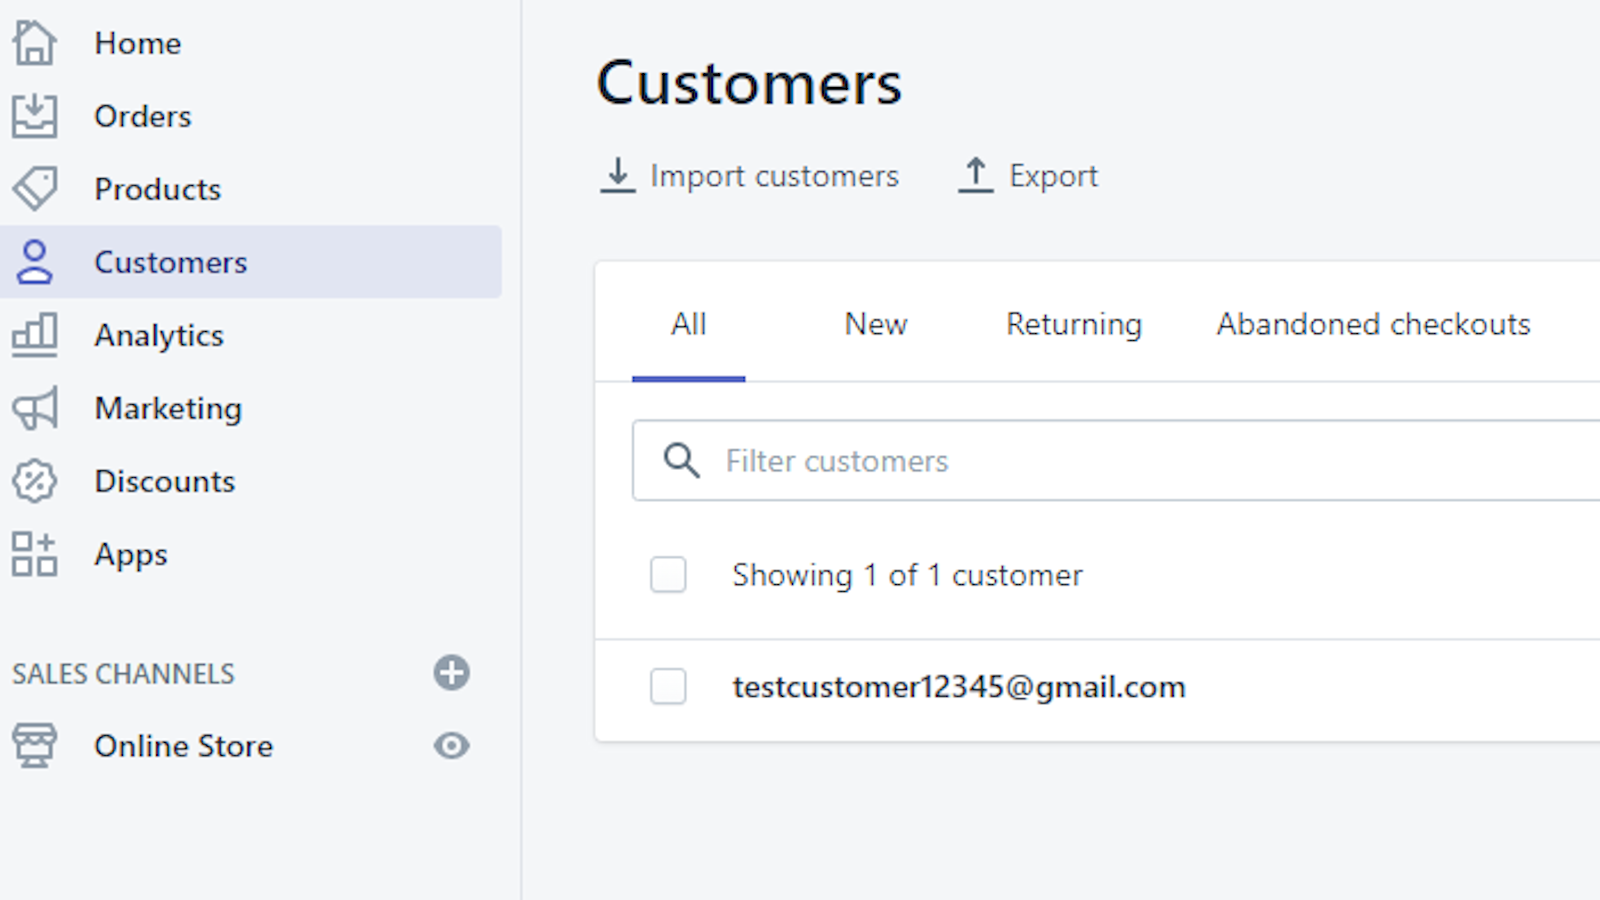 Customer automatically added when email box is filled